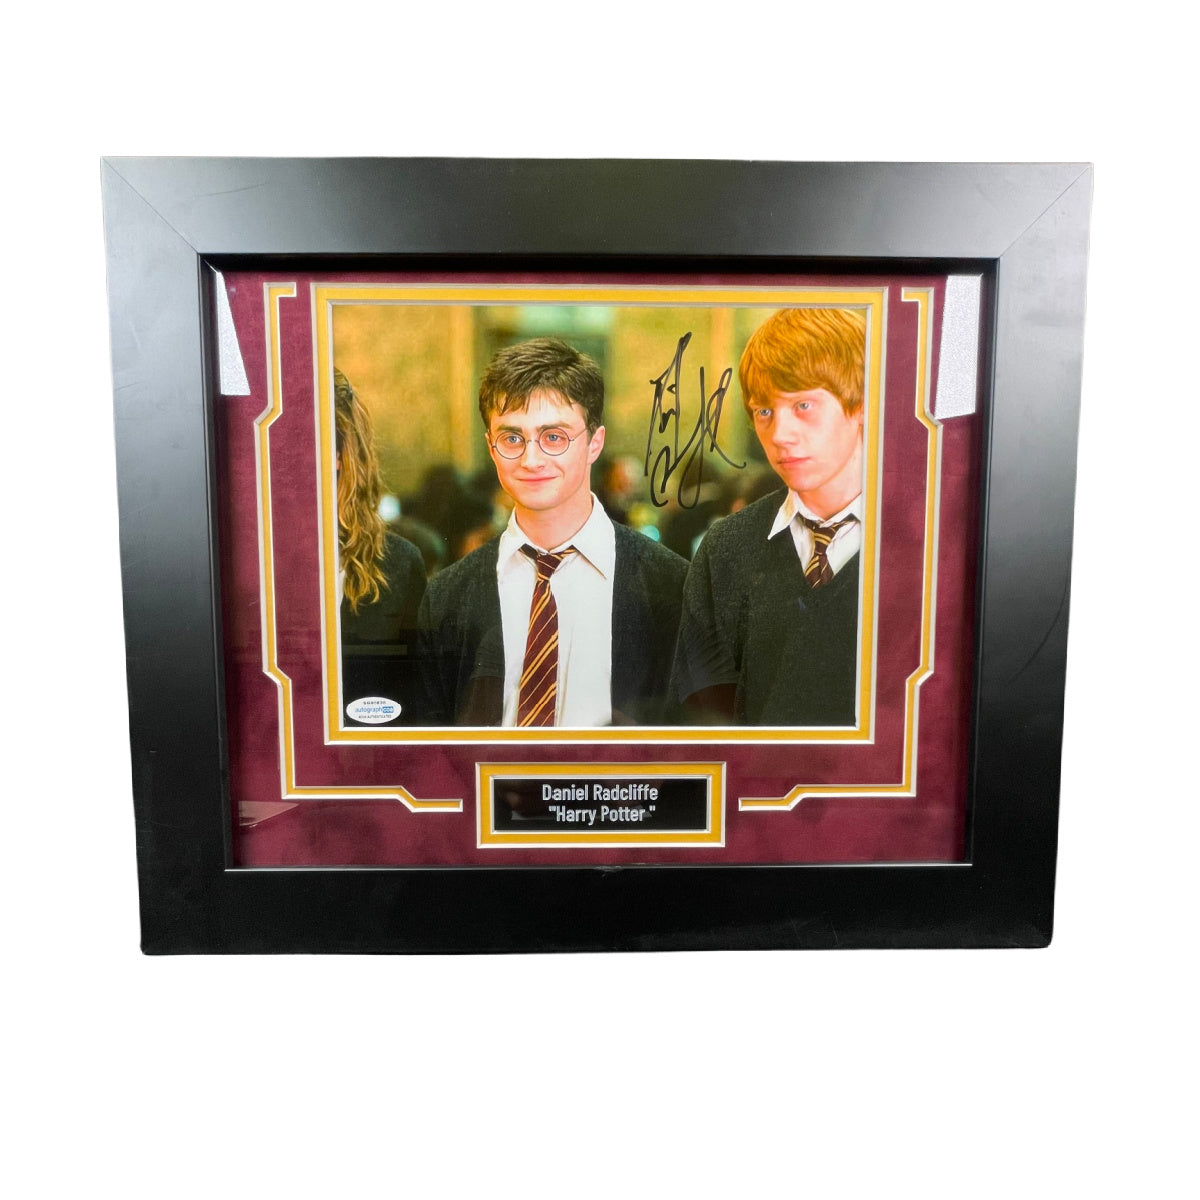 Daniel Radcliffe Signed 8x10 Photo Framed Harry Potter Signed Authentic AutographCOA